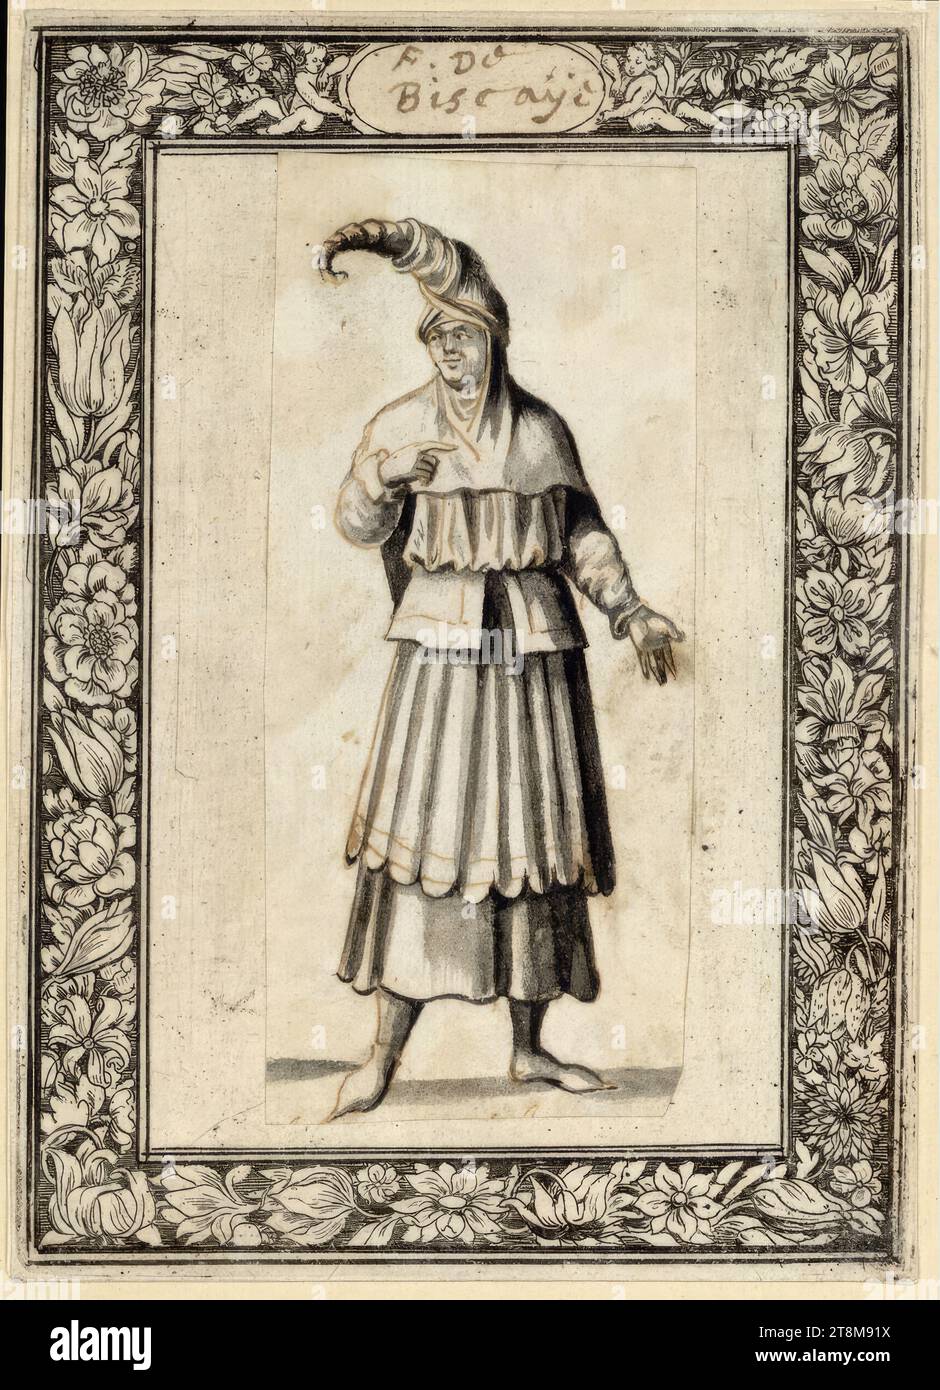 Woman from Biscay, between 1650 and 1664, Drawing, pen and brown ink, gray wash; glued to a sheet with engraved decorative strip (flower thread), 9.3 x 4.1 cm, M.o. in cartouche 'F. de Biscaye' (pen in brown Stock Photo